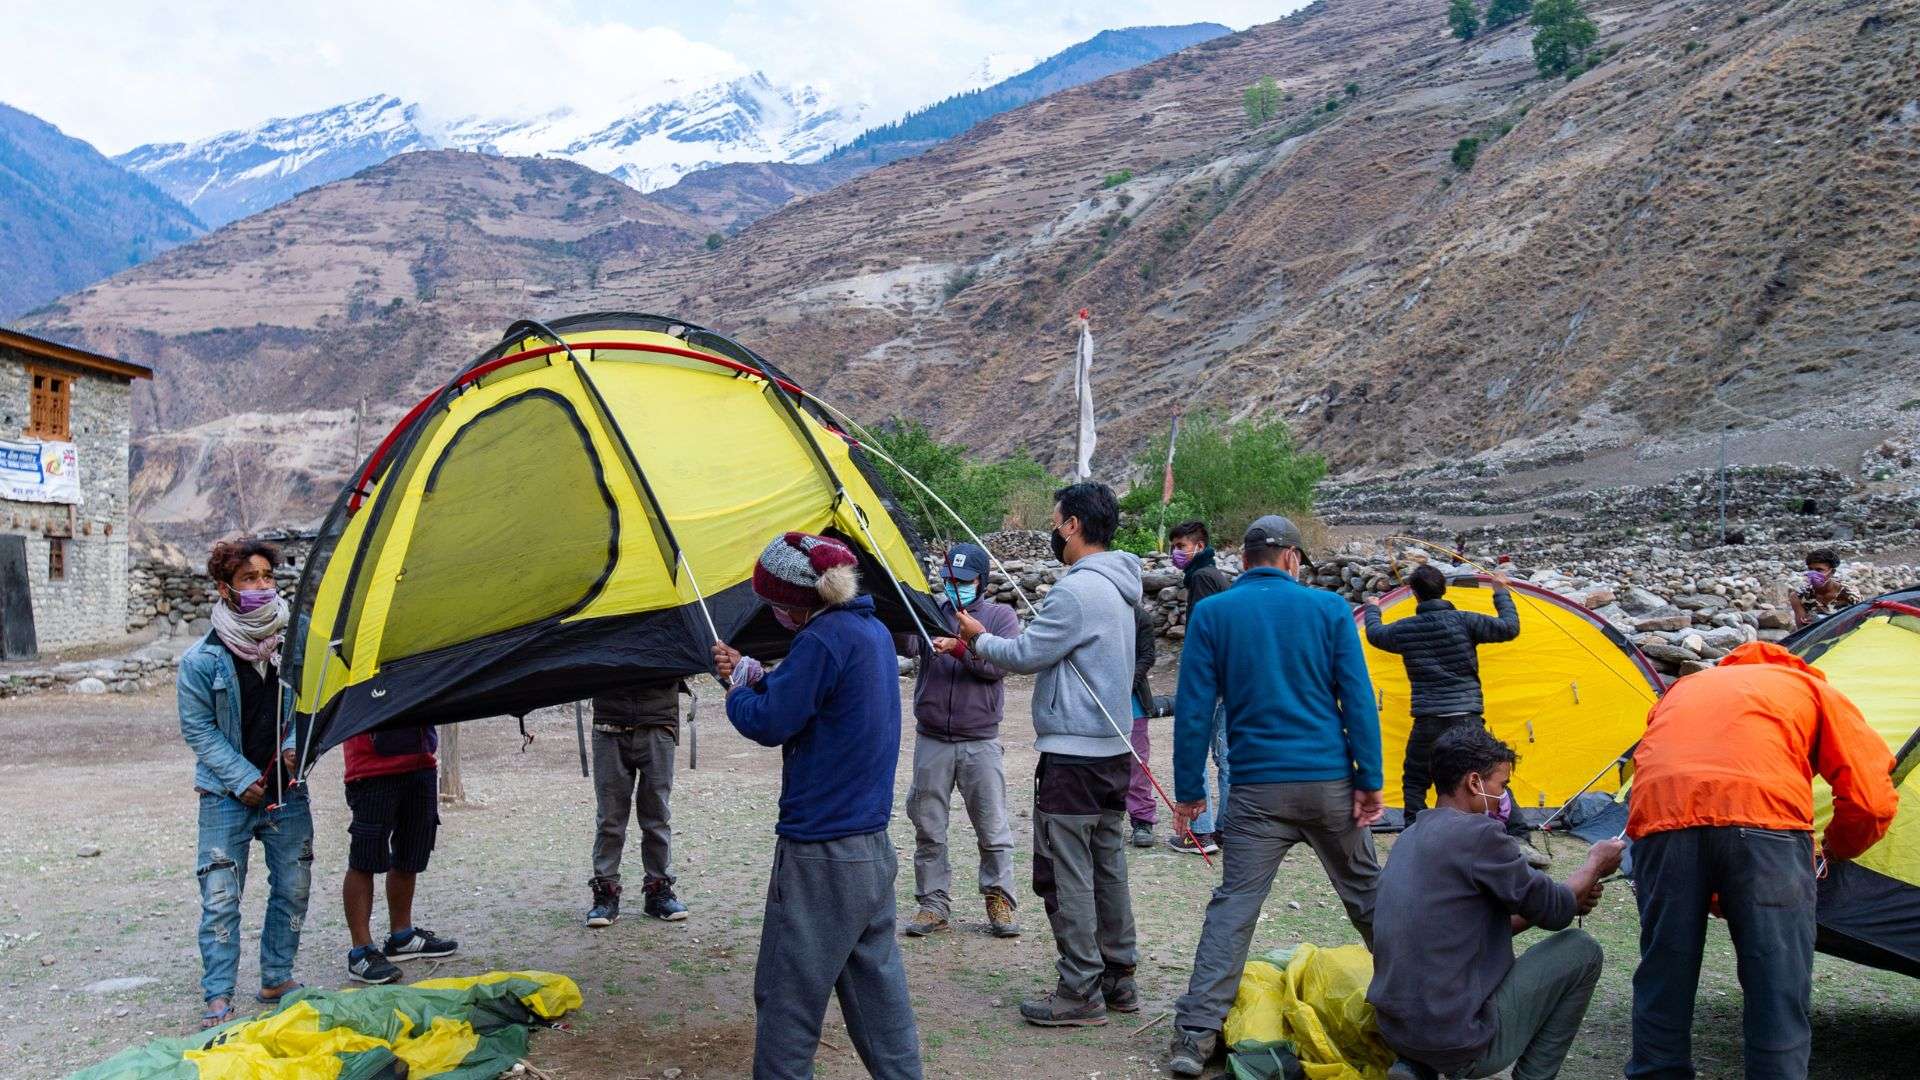 Expedition team members set up camp for the day after a grueling day of trekking across the mountains.